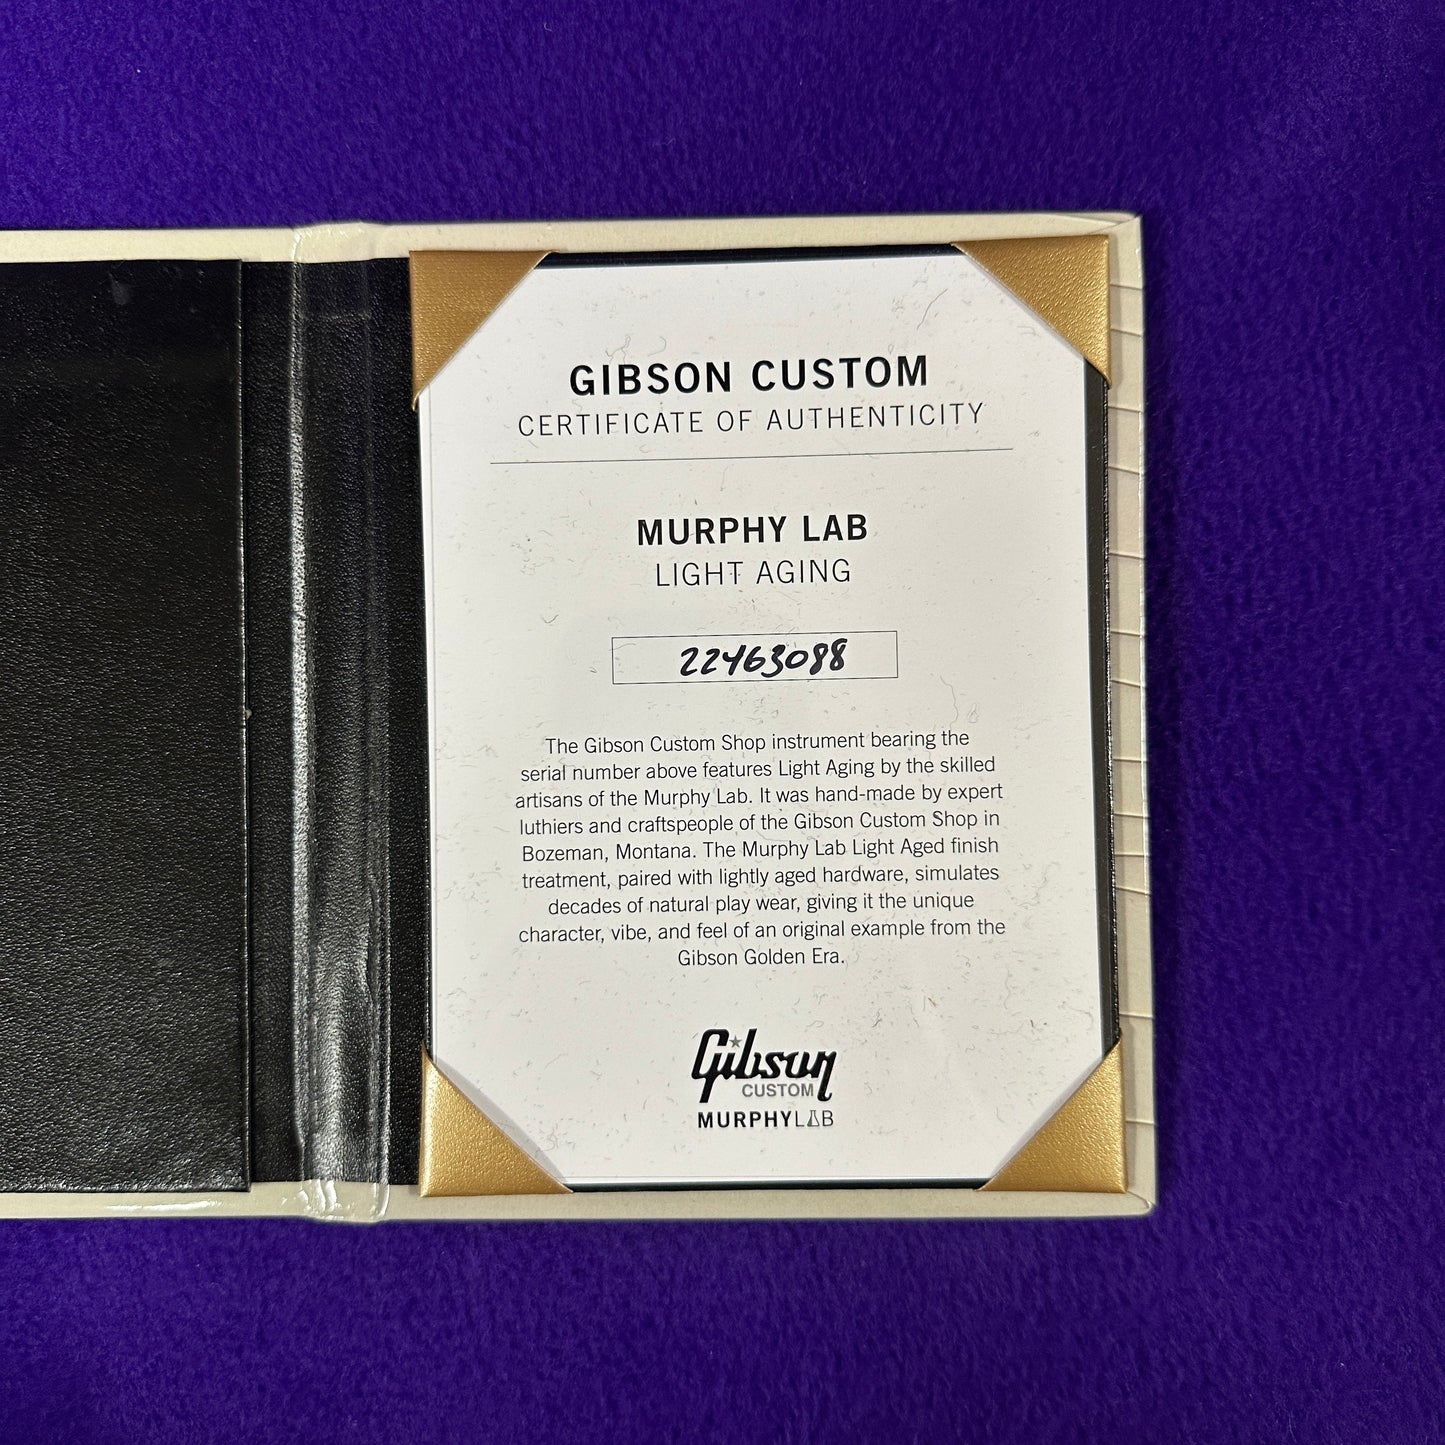 Certificate of authenticity for Used Gibson 1942 Banner J-45 Murphy Lab.